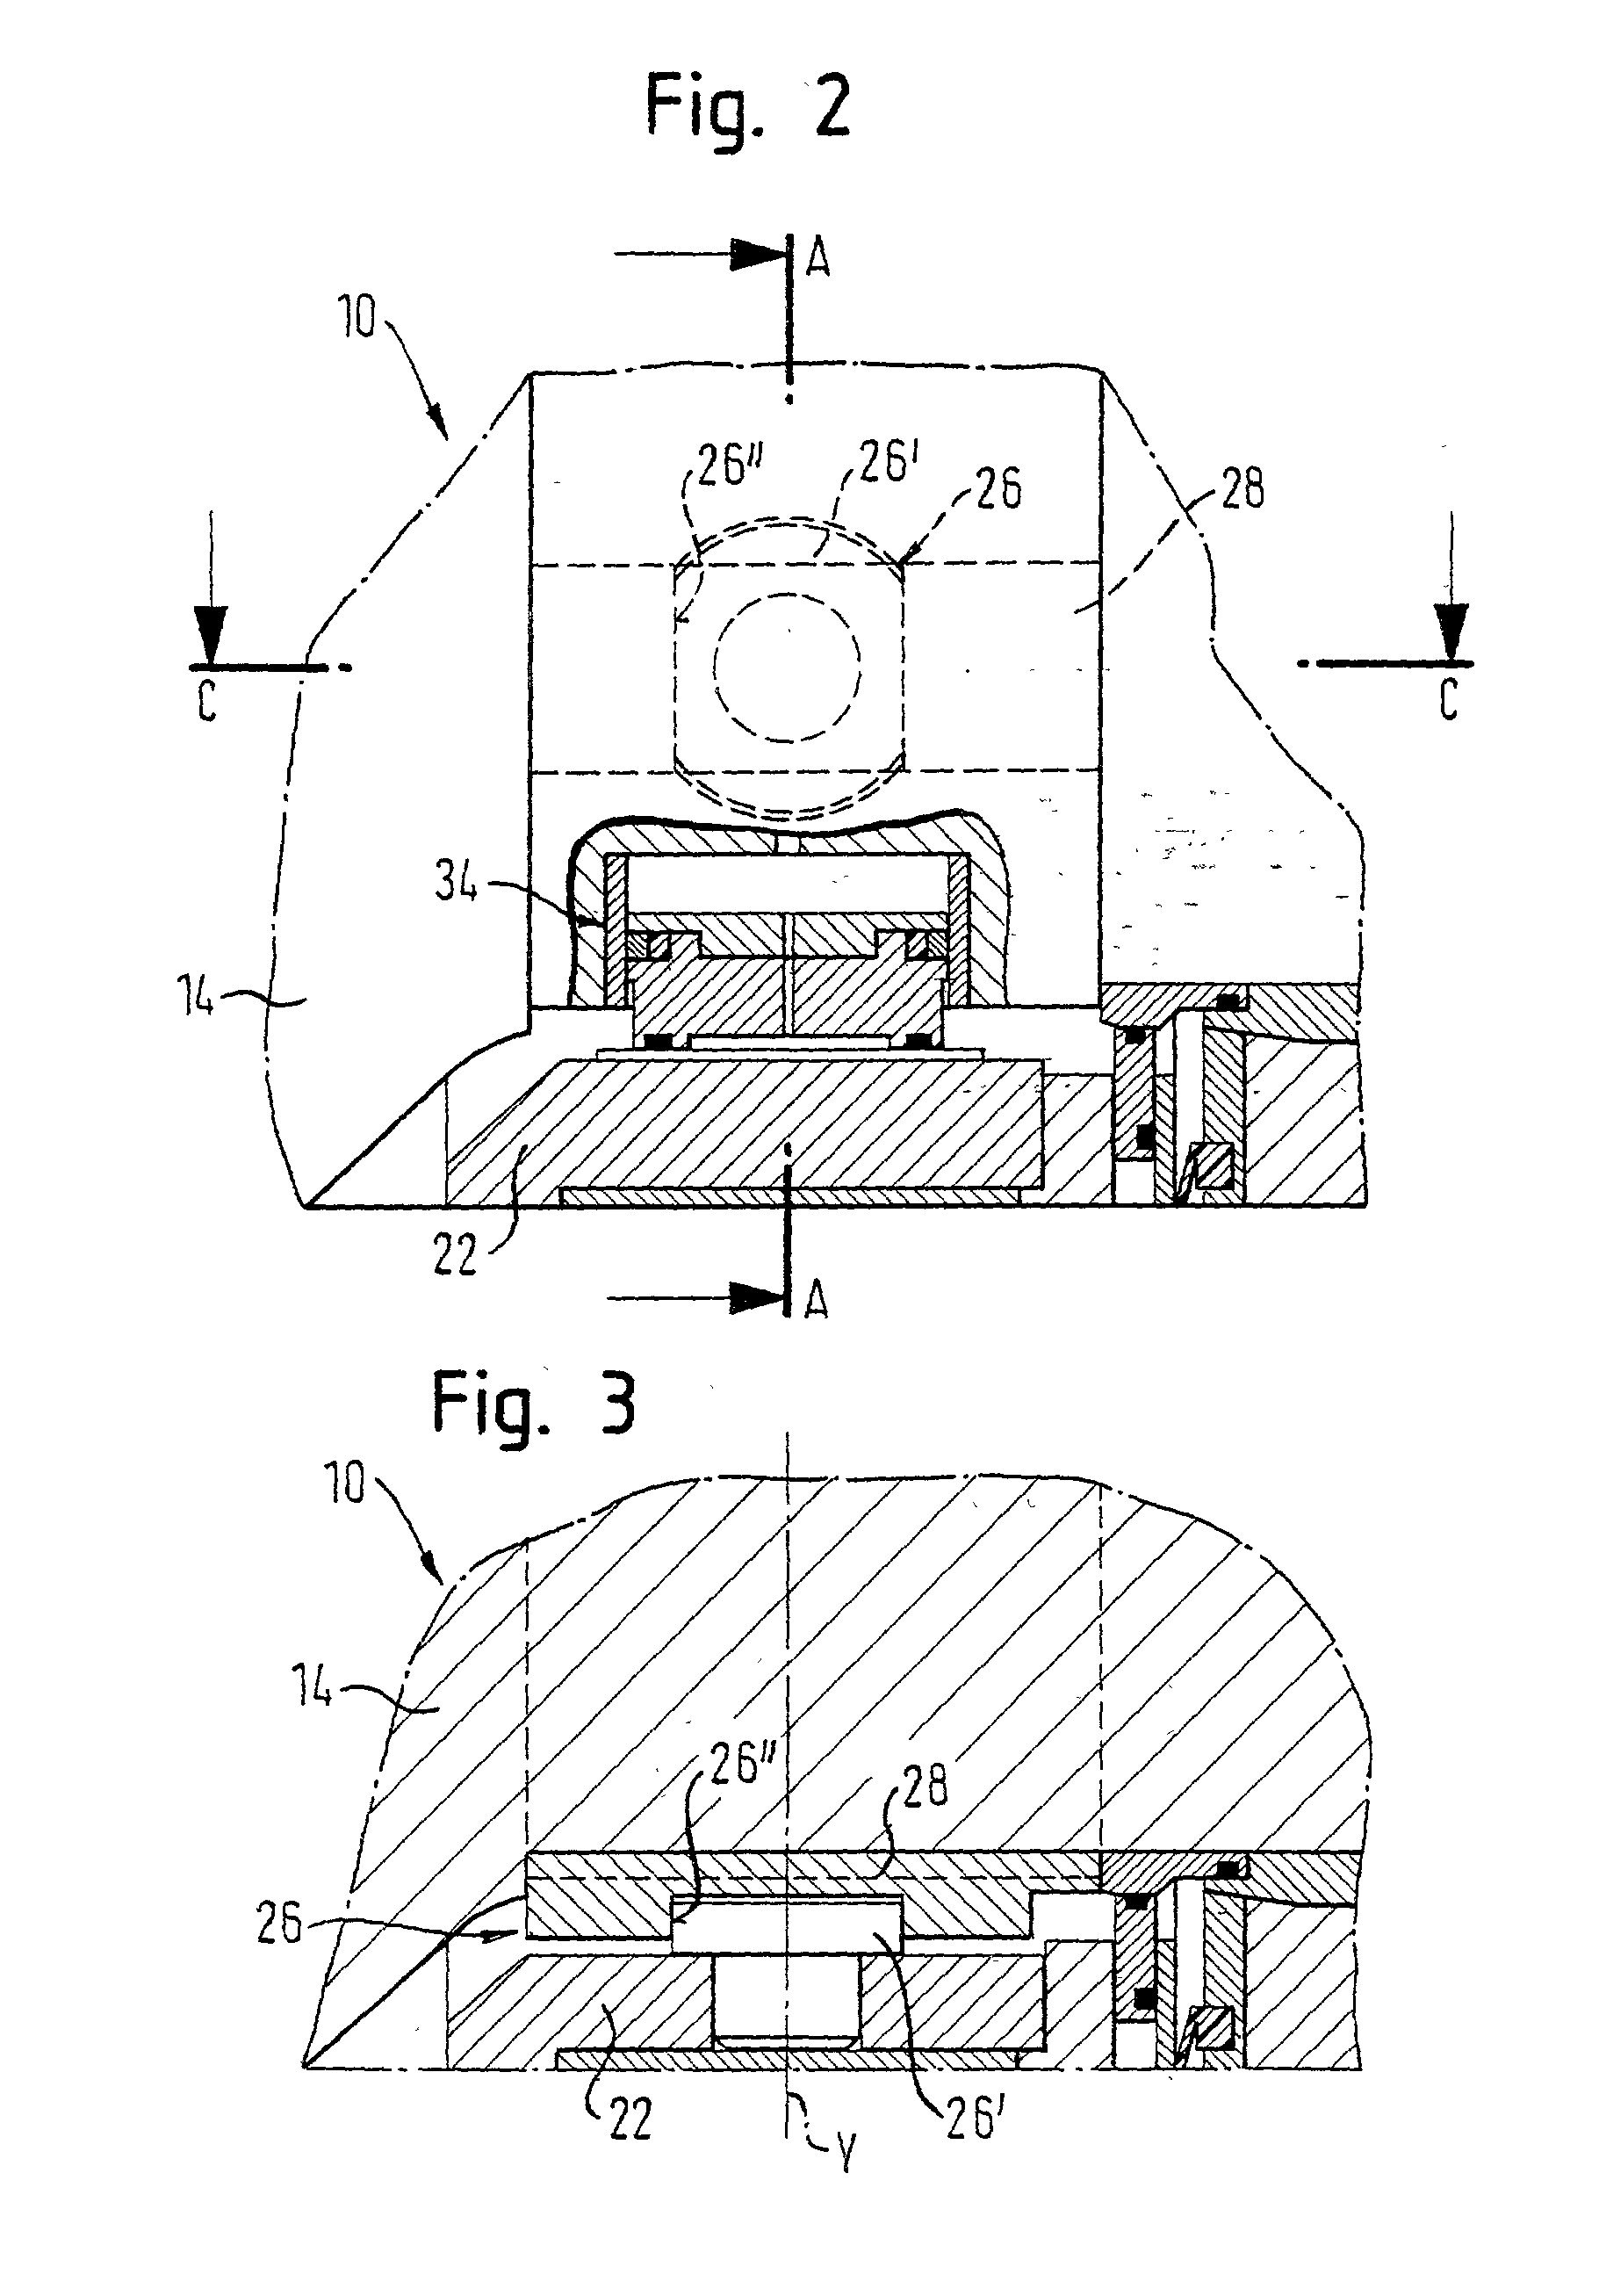 Self-adjusting deflection controlled roll